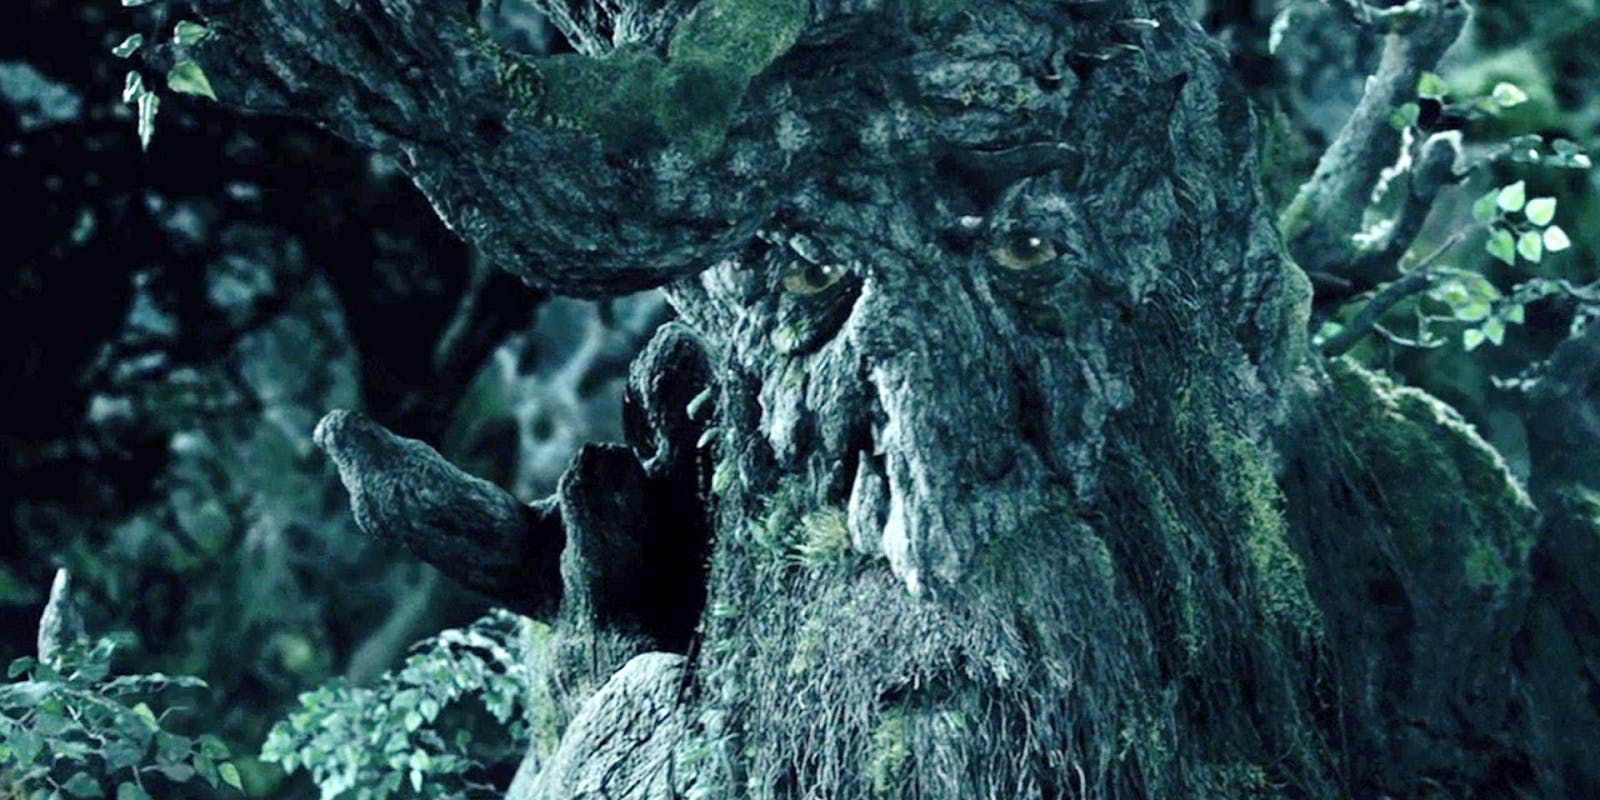 An Ent in the lord of the rings